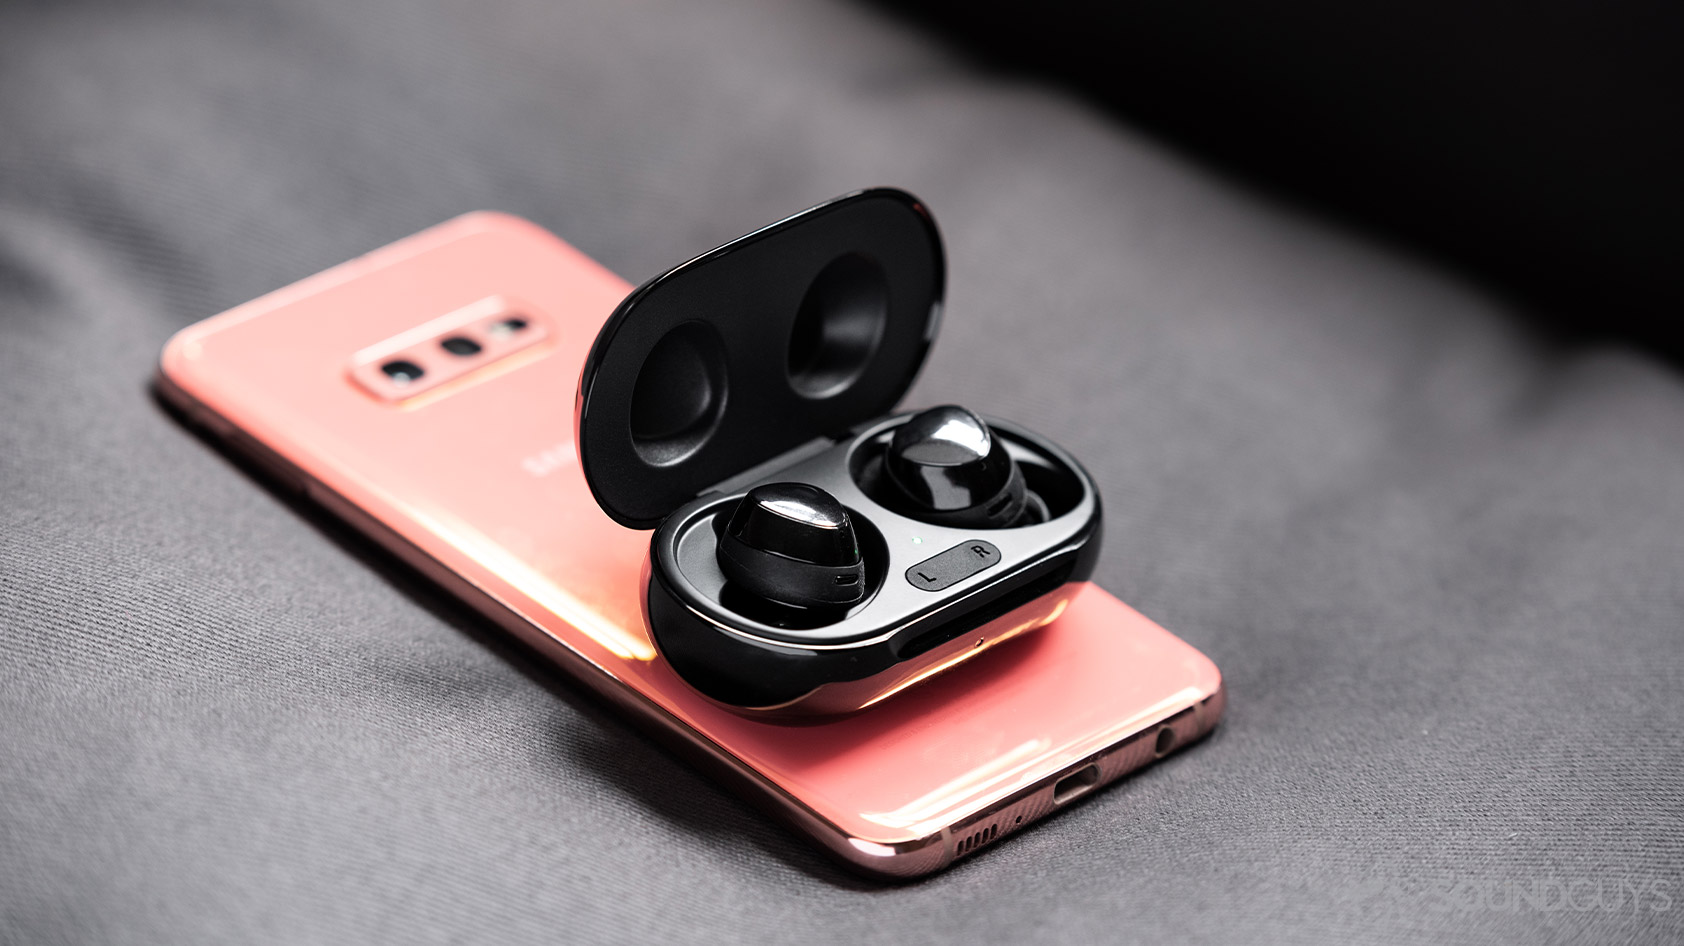 A picture of the Samsung Galaxy Buds Plus true wireless earbuds on top of a Samsung Galaxy S10e smartphone in flamingo pink.